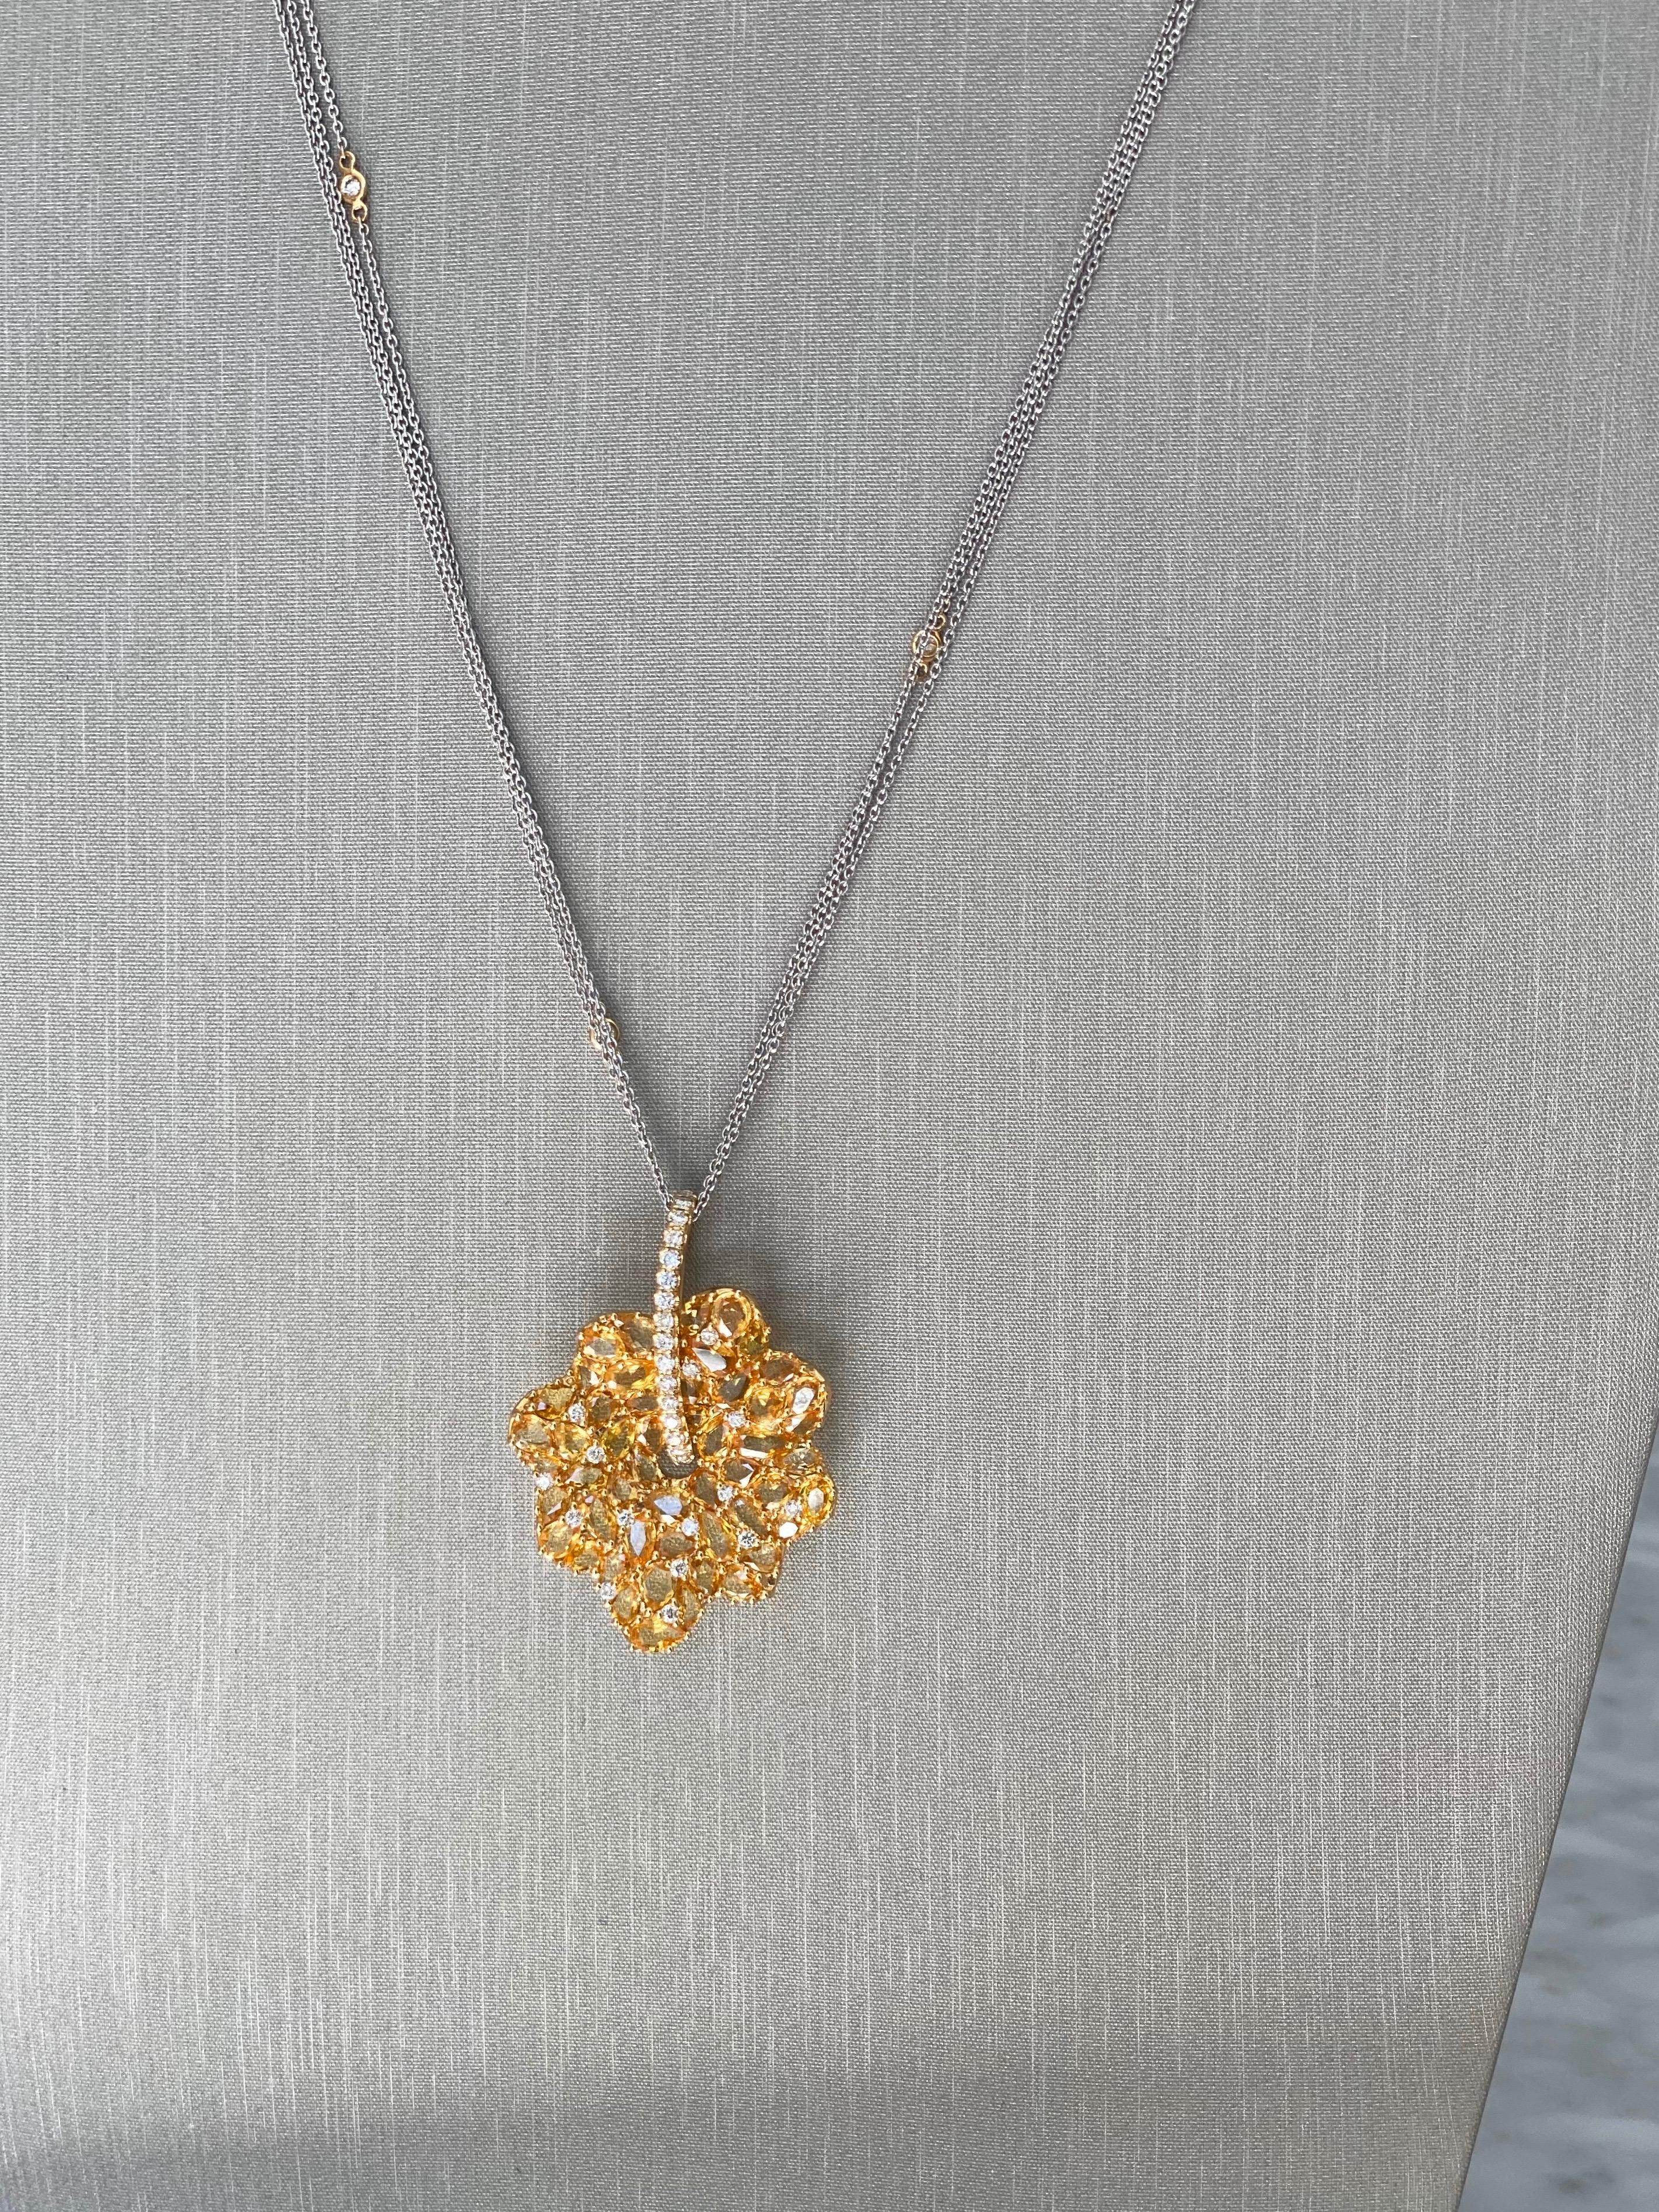 Round Cut Diamond and Yellow Sapphire Pendant Necklace For Sale